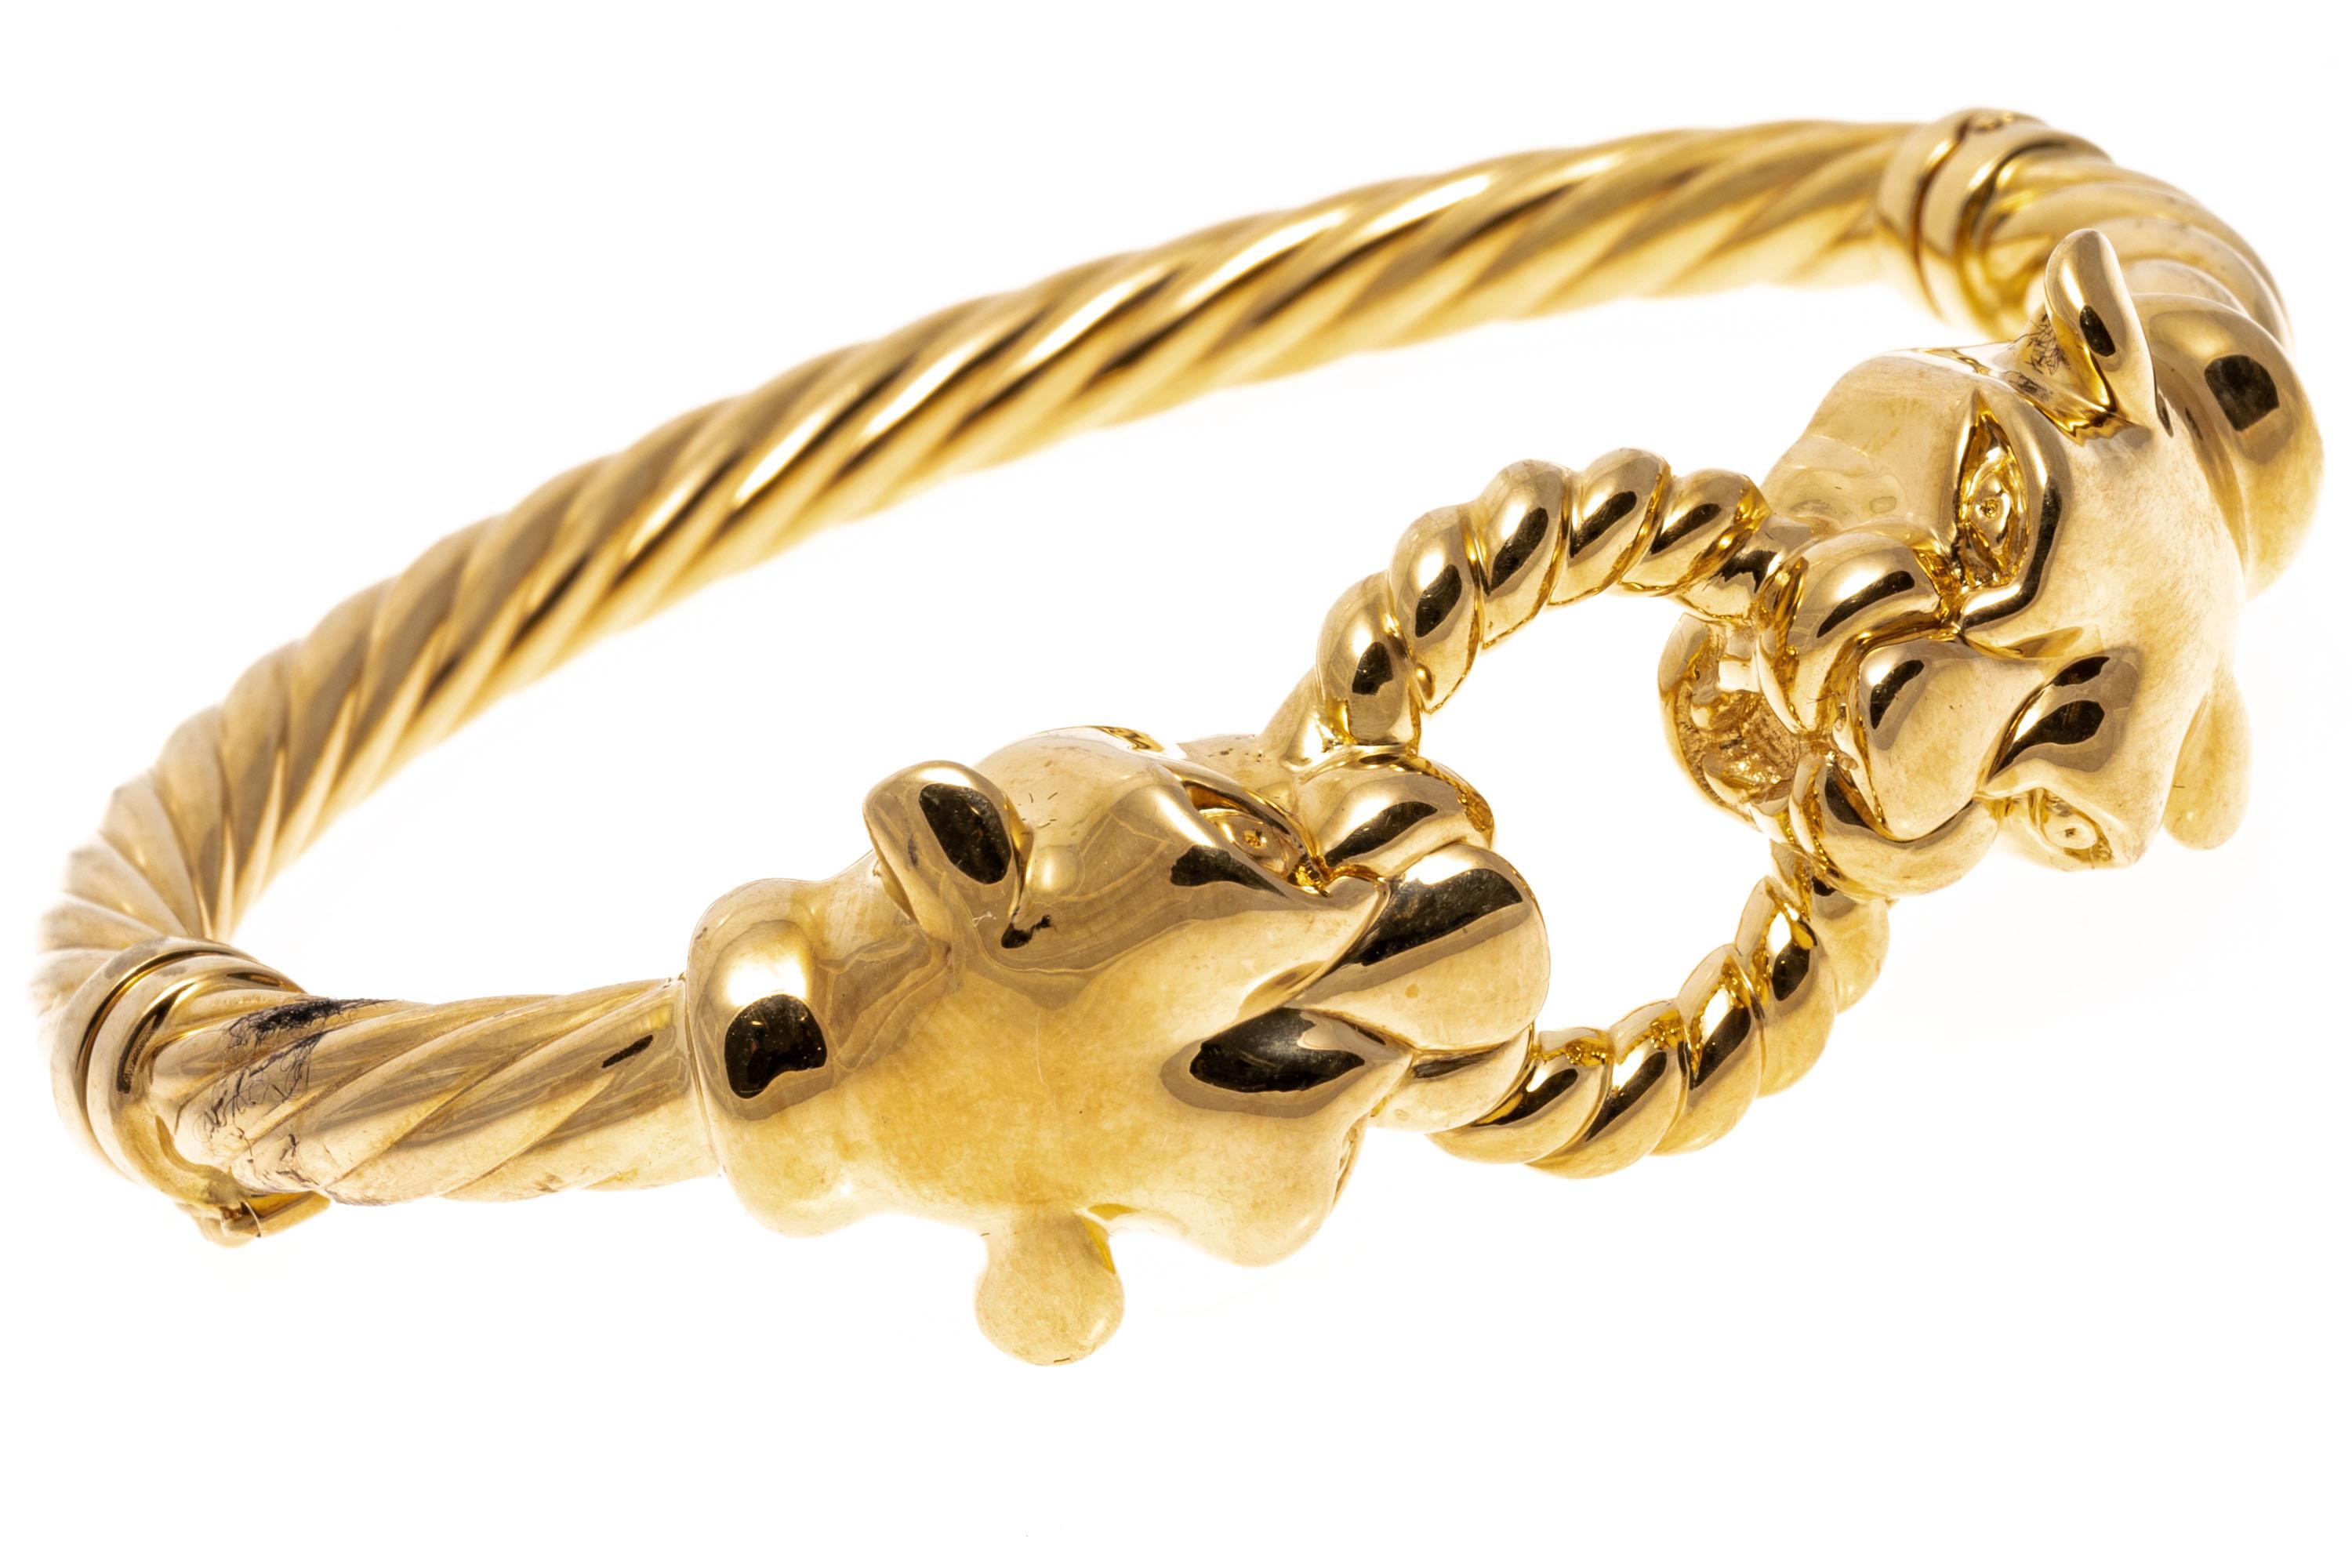 14k yellow gold bracelet. This impactful bracelet is a hinged, twisted style bangle, with a center opposing motif of two panthers holding a twisted ring in their mouths. The bracelet has a figure eight style clasp.
Marks: 14k
Dimensions: 2 3/8